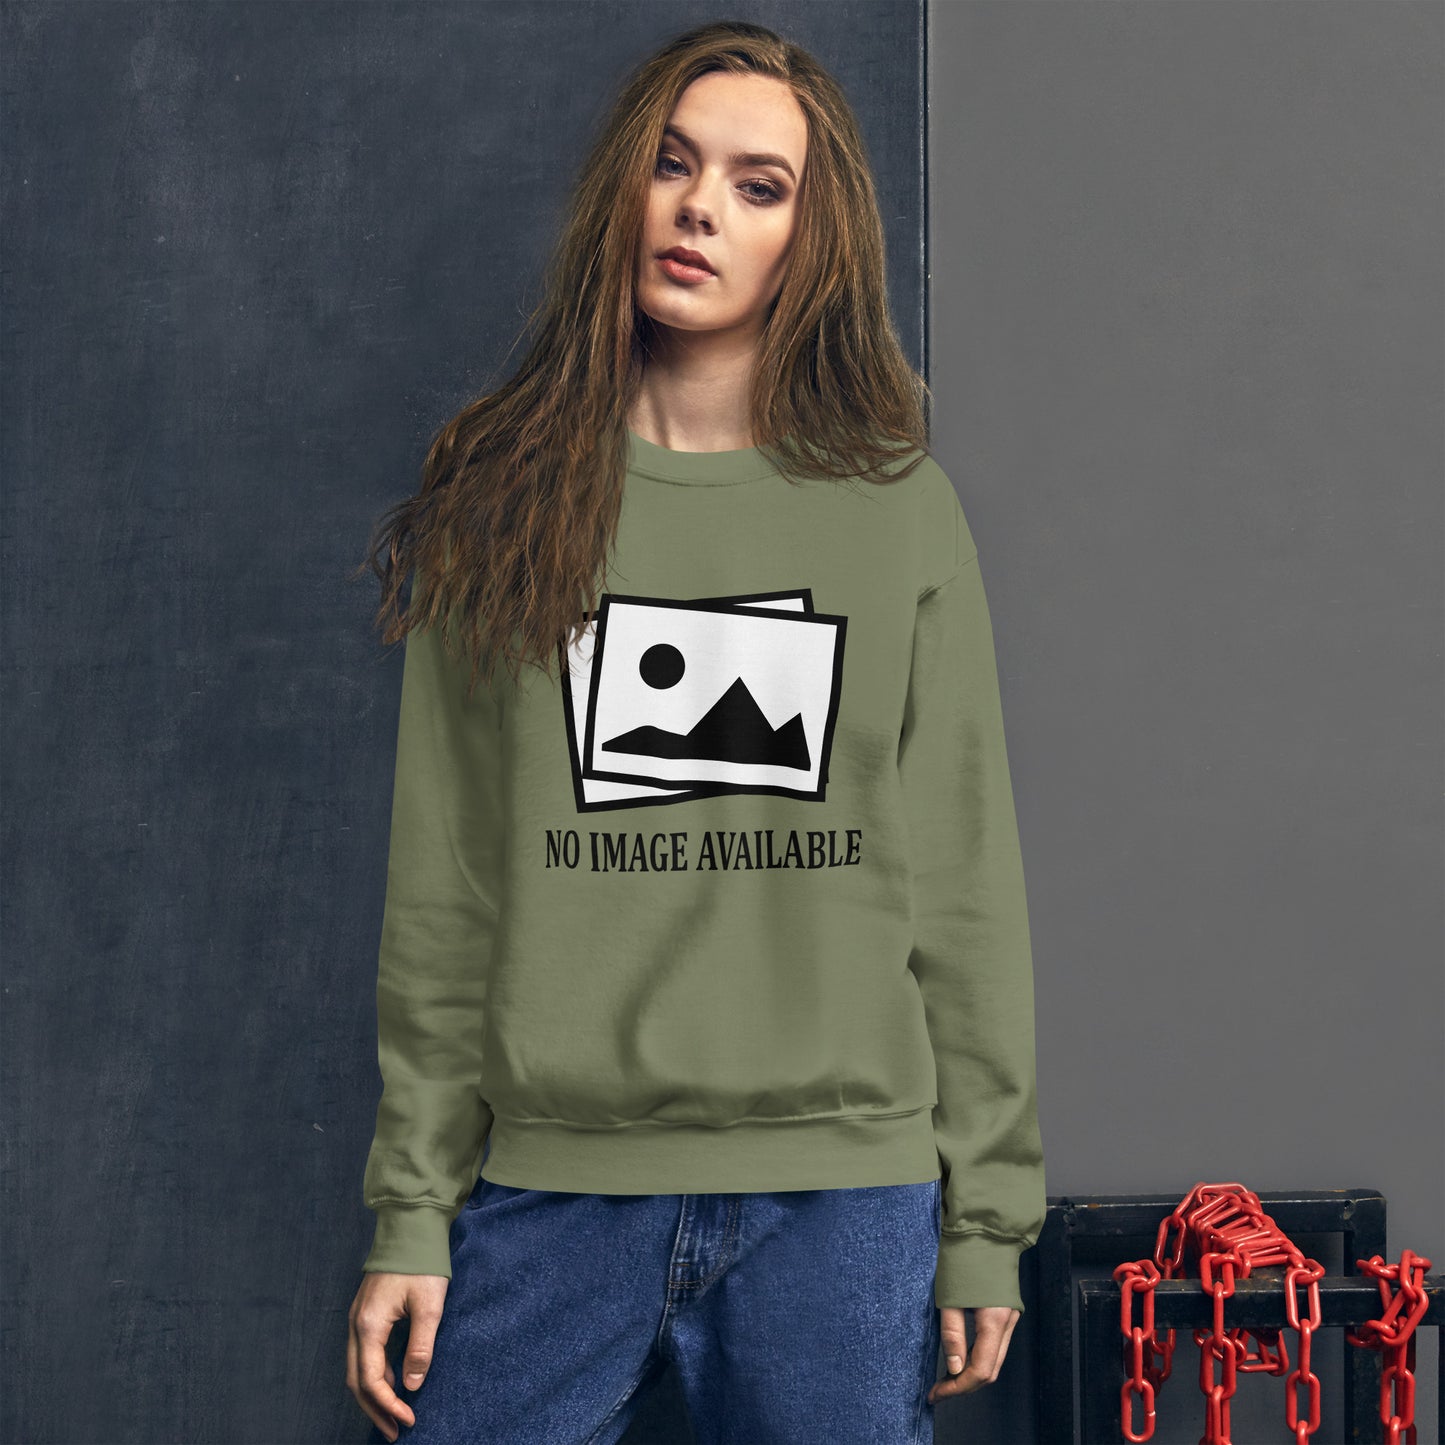 Women with military green sweatshirt with image and text "no image available"